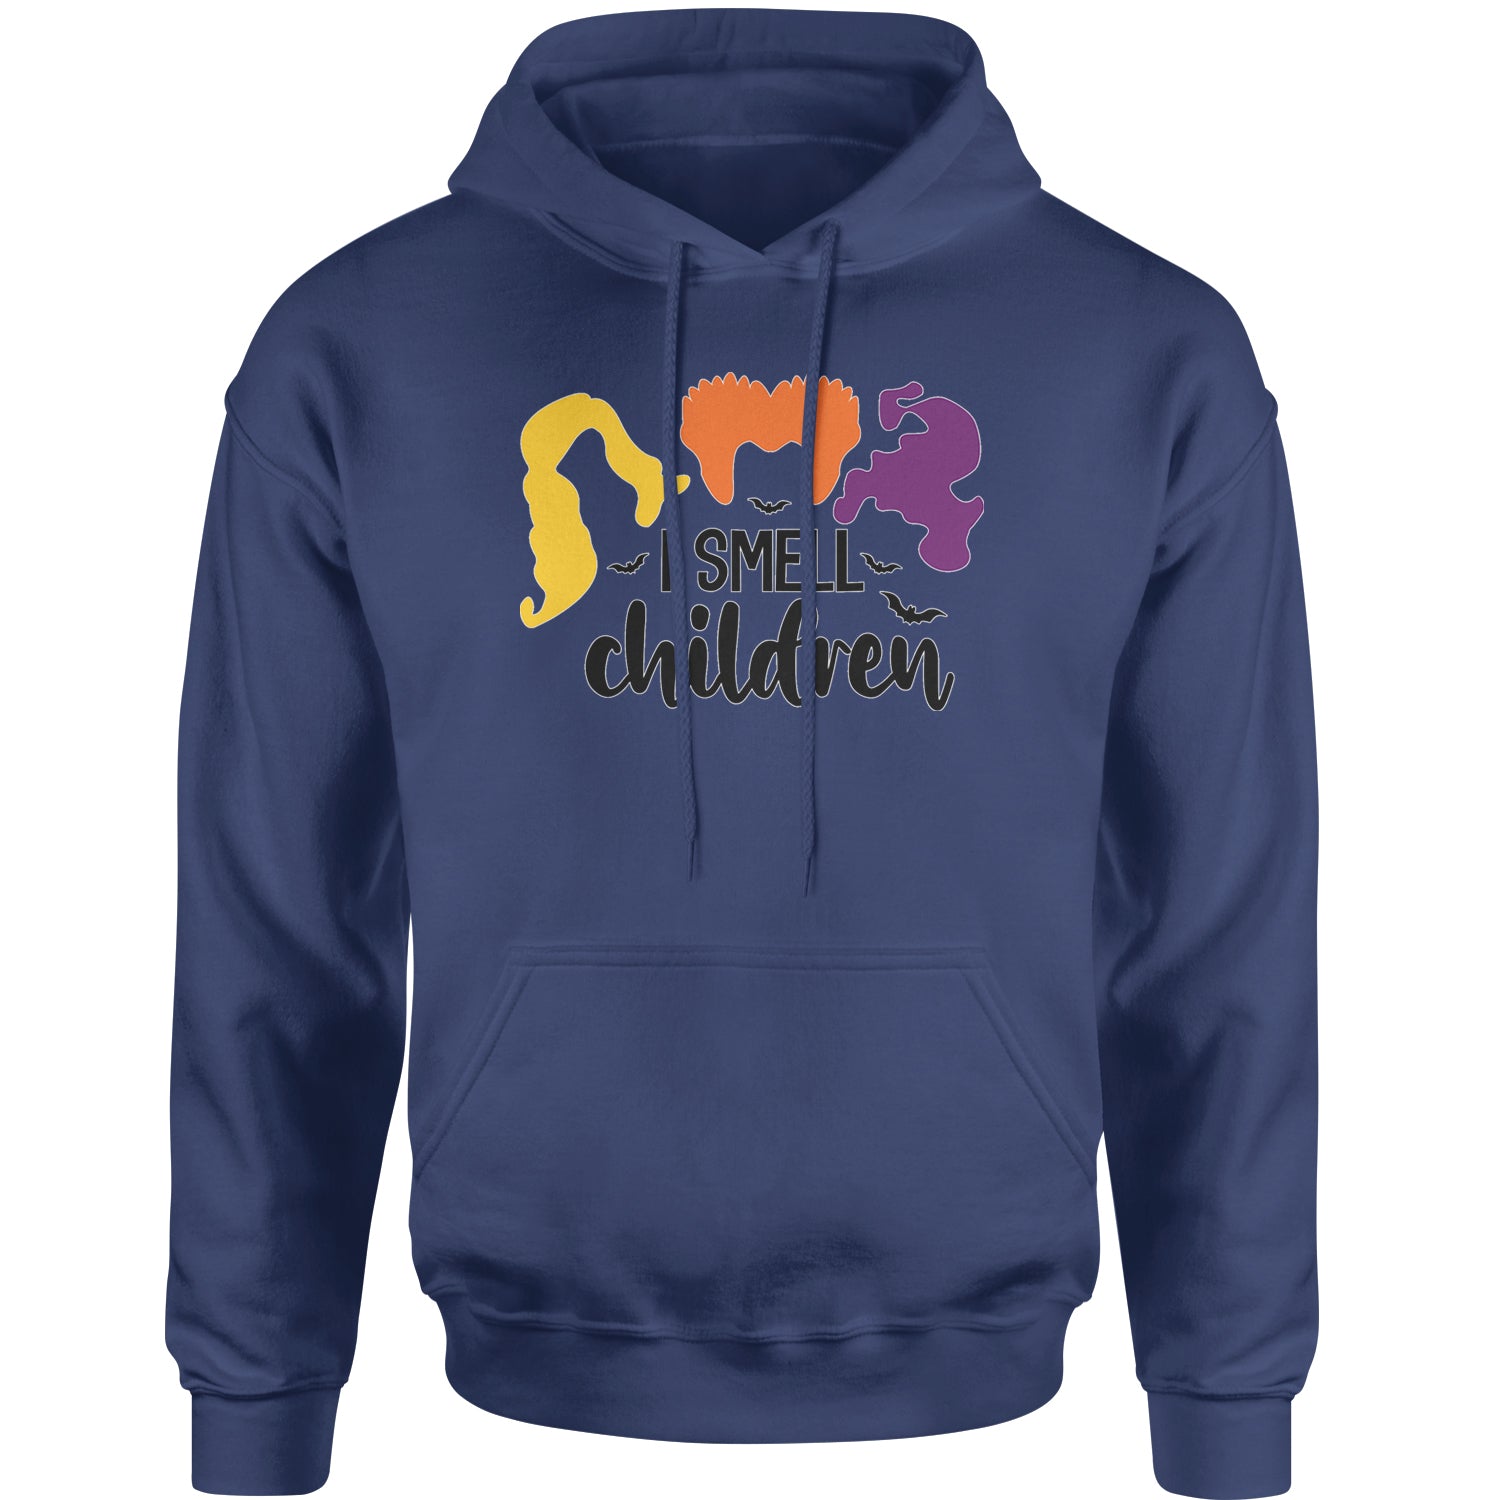 I Smell Children Hocus Pocus Adult Hoodie Sweatshirt descendants, enchanted, eve, hallows, hocus, or, pocus, sanderson, sisters, treat, trick, witches by Expression Tees